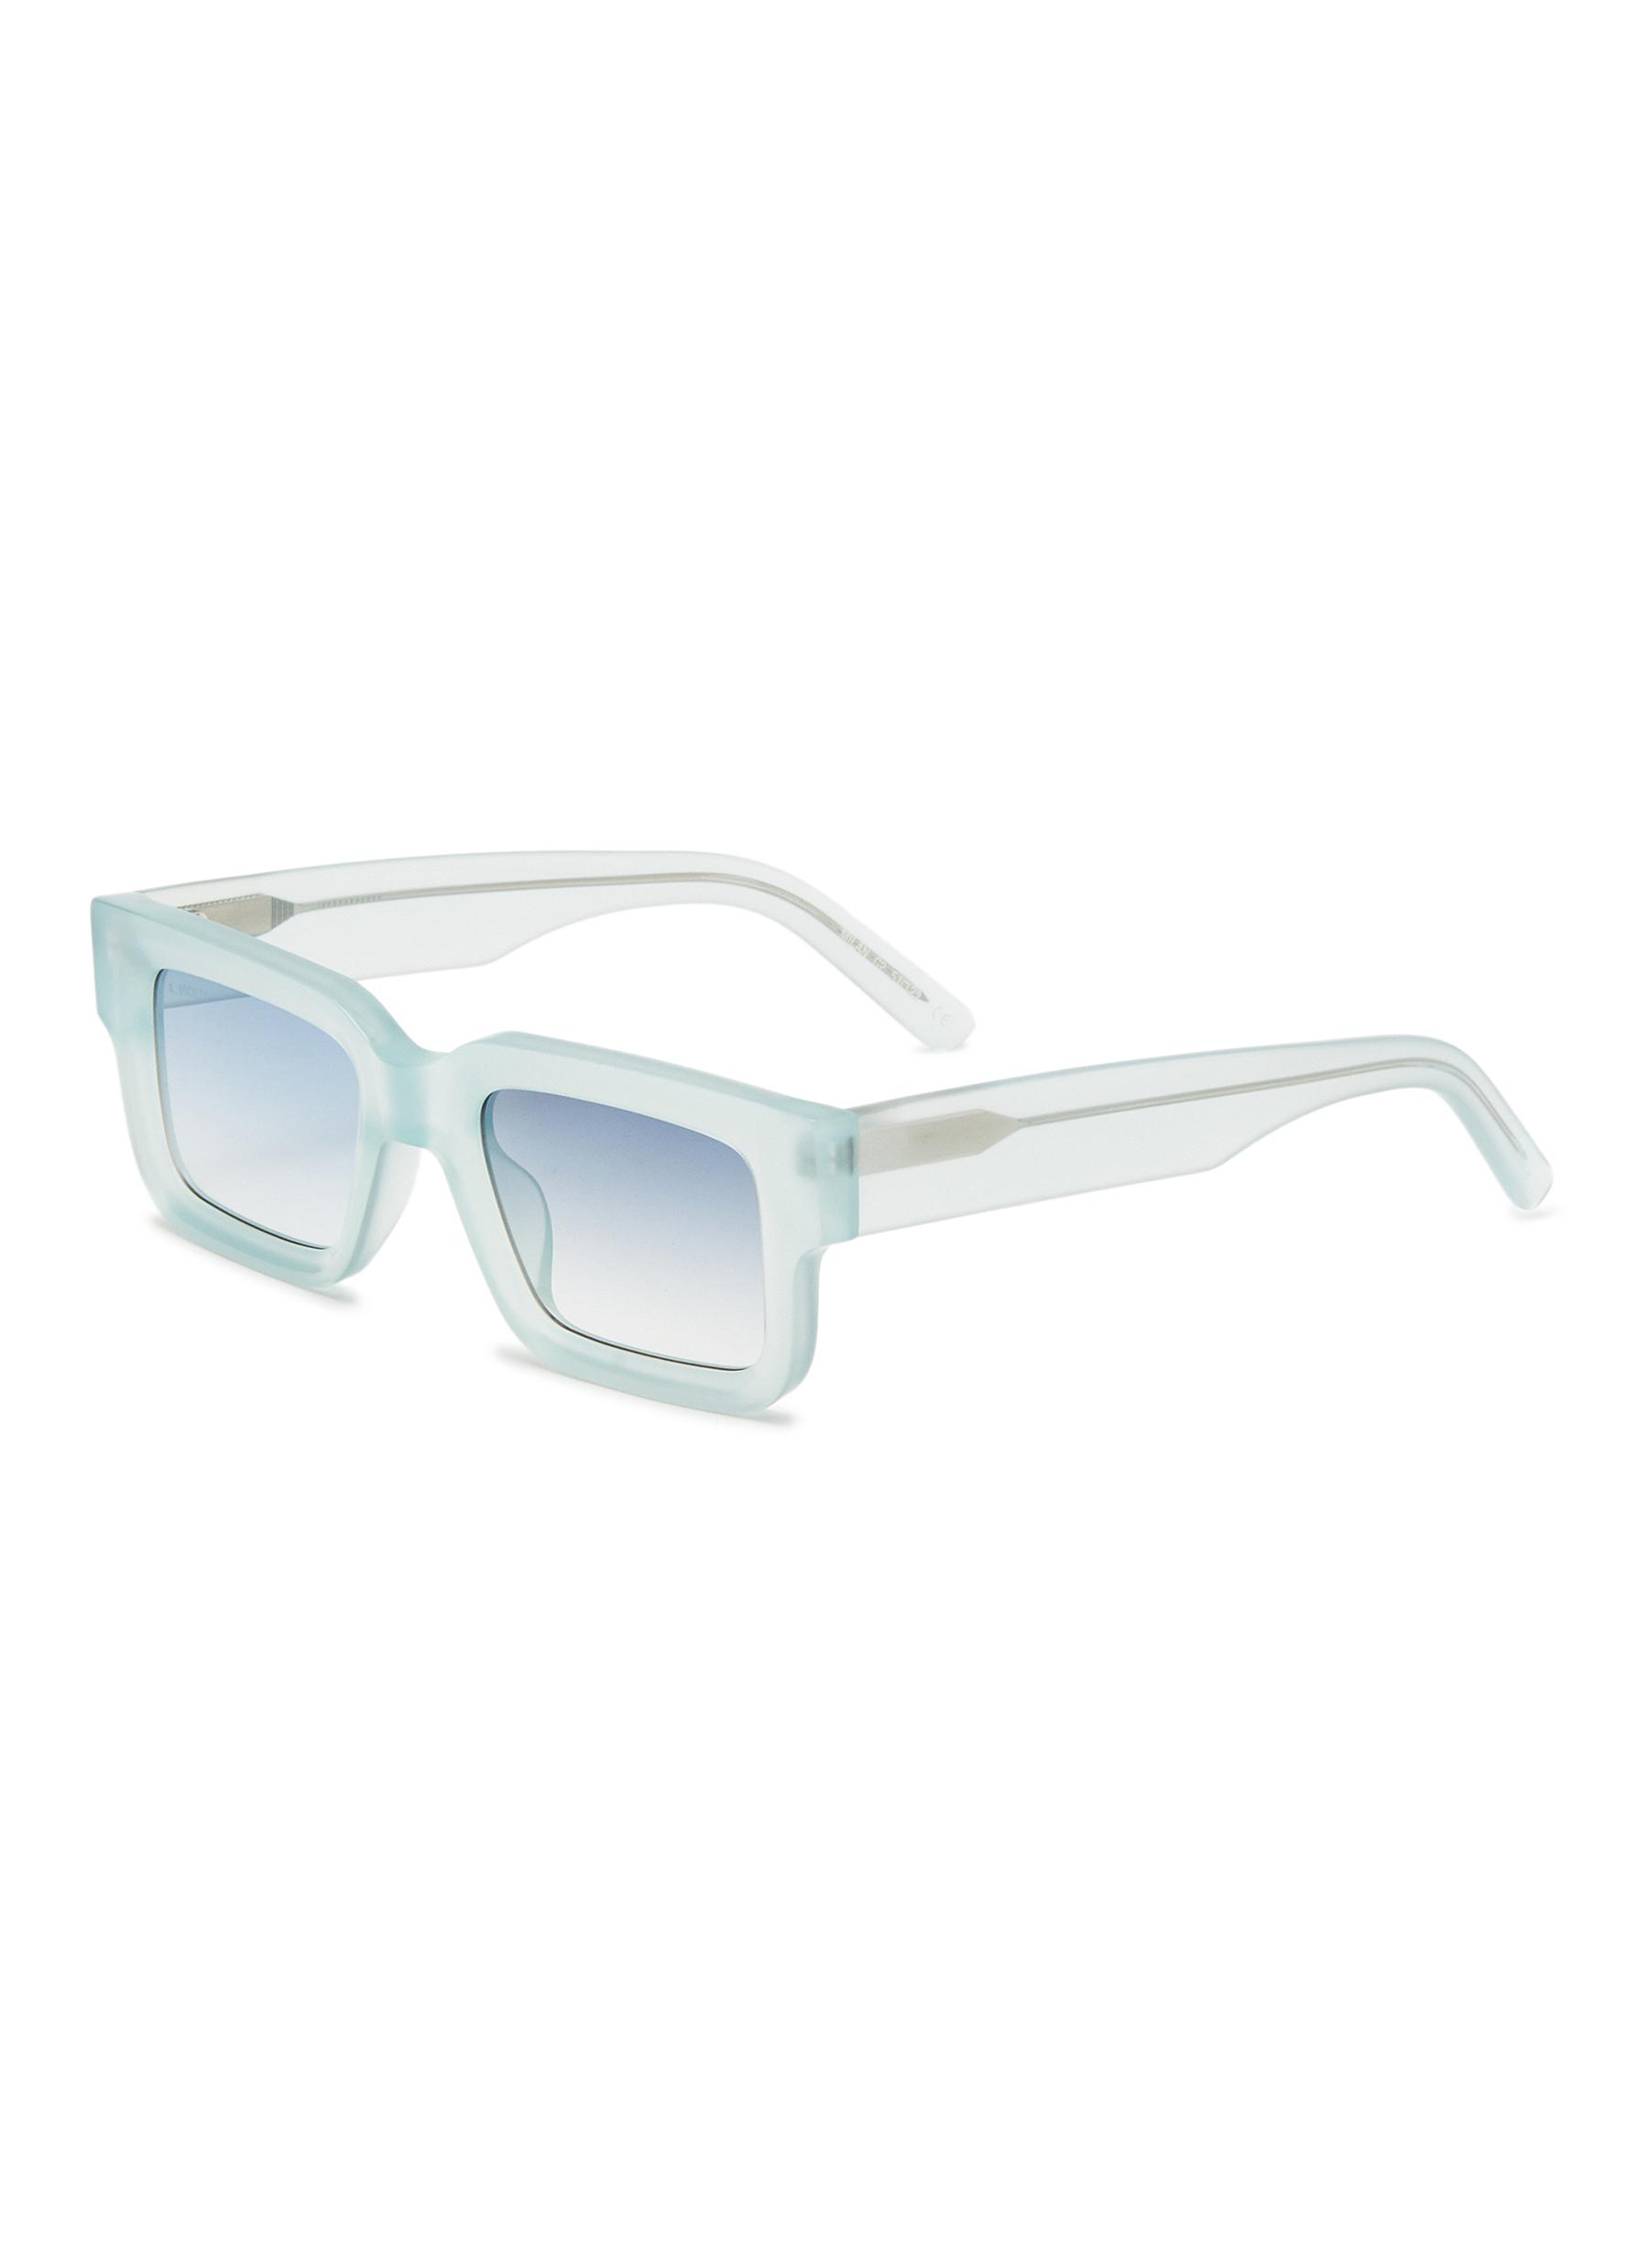 A. Society Milan' Thick Acetate Rectangular Sunglasses In Blue